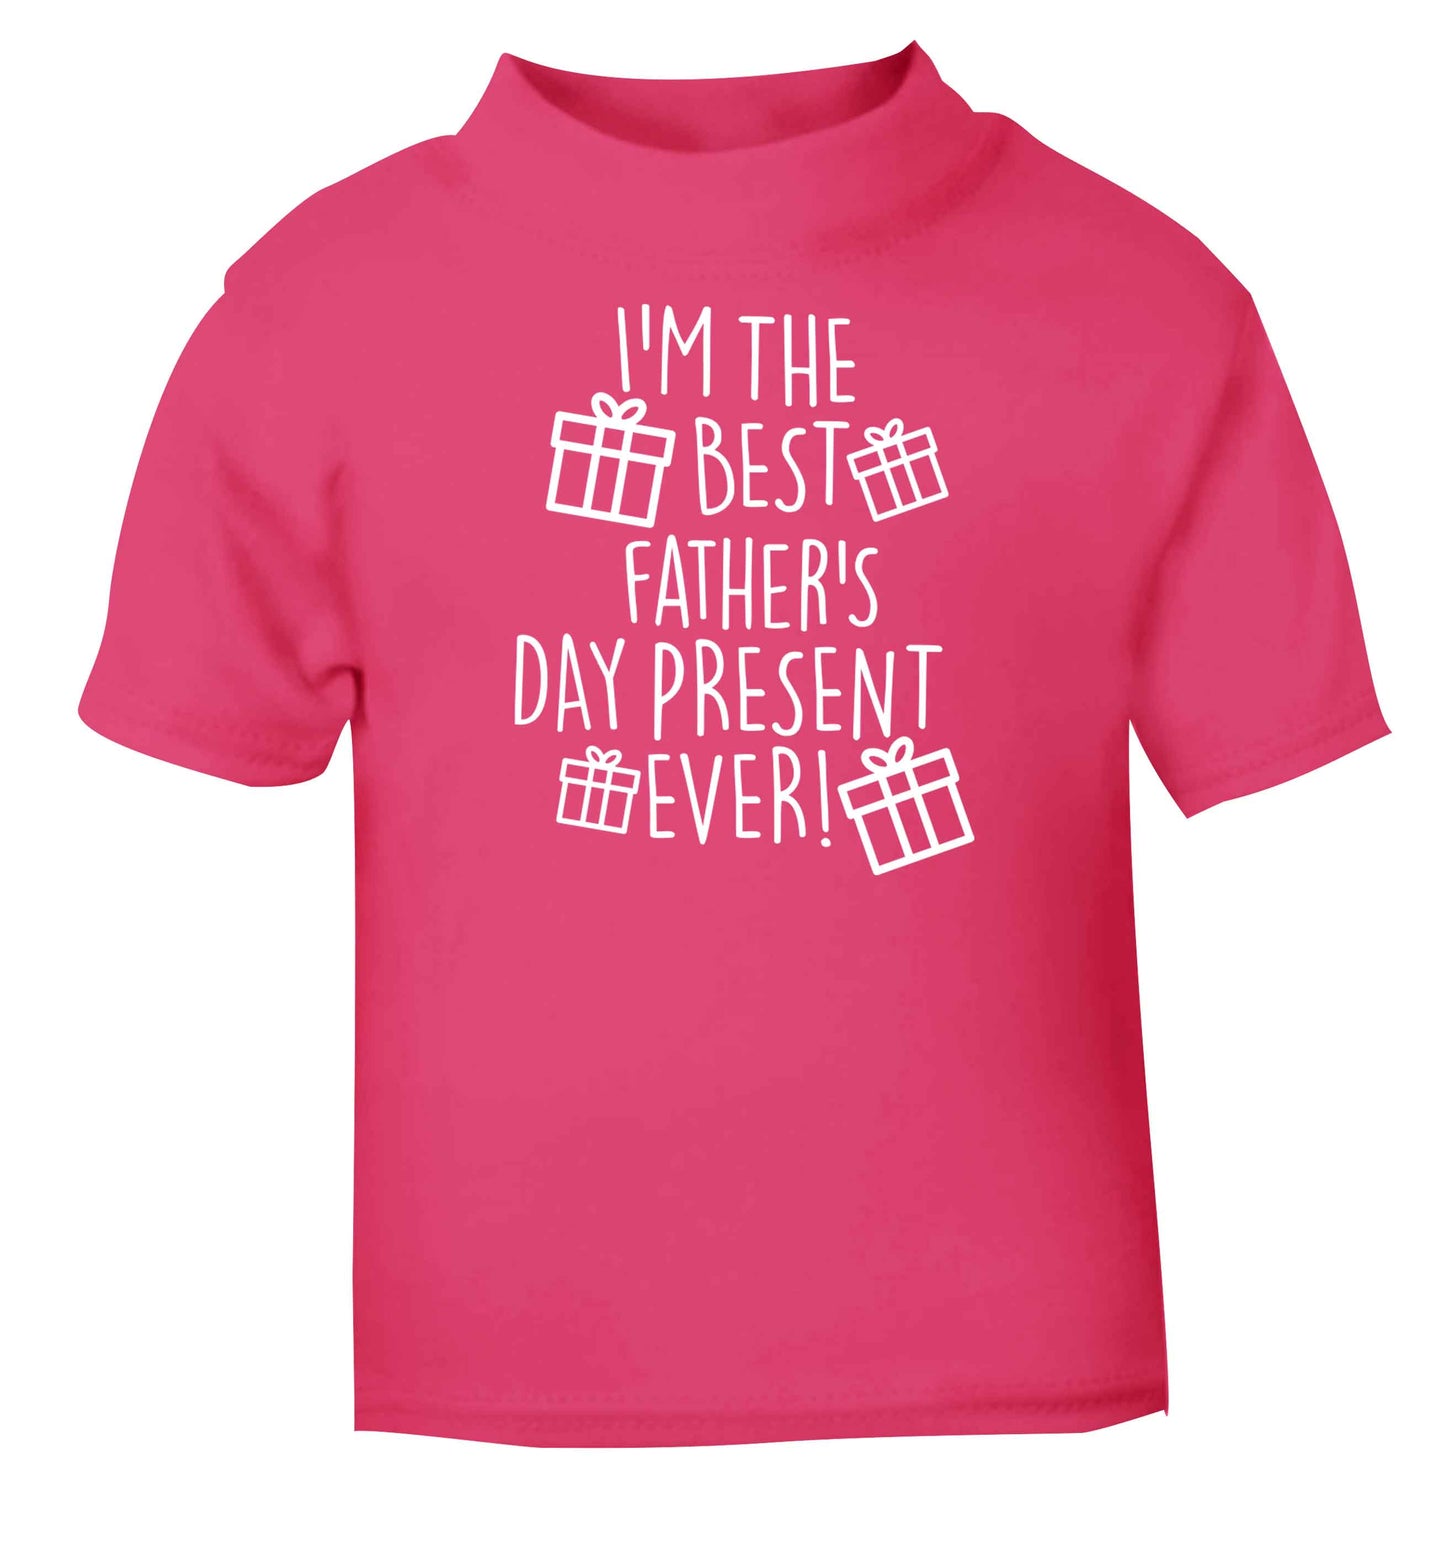 I'm the best father's day present ever!| Baby Toddler Tshirt